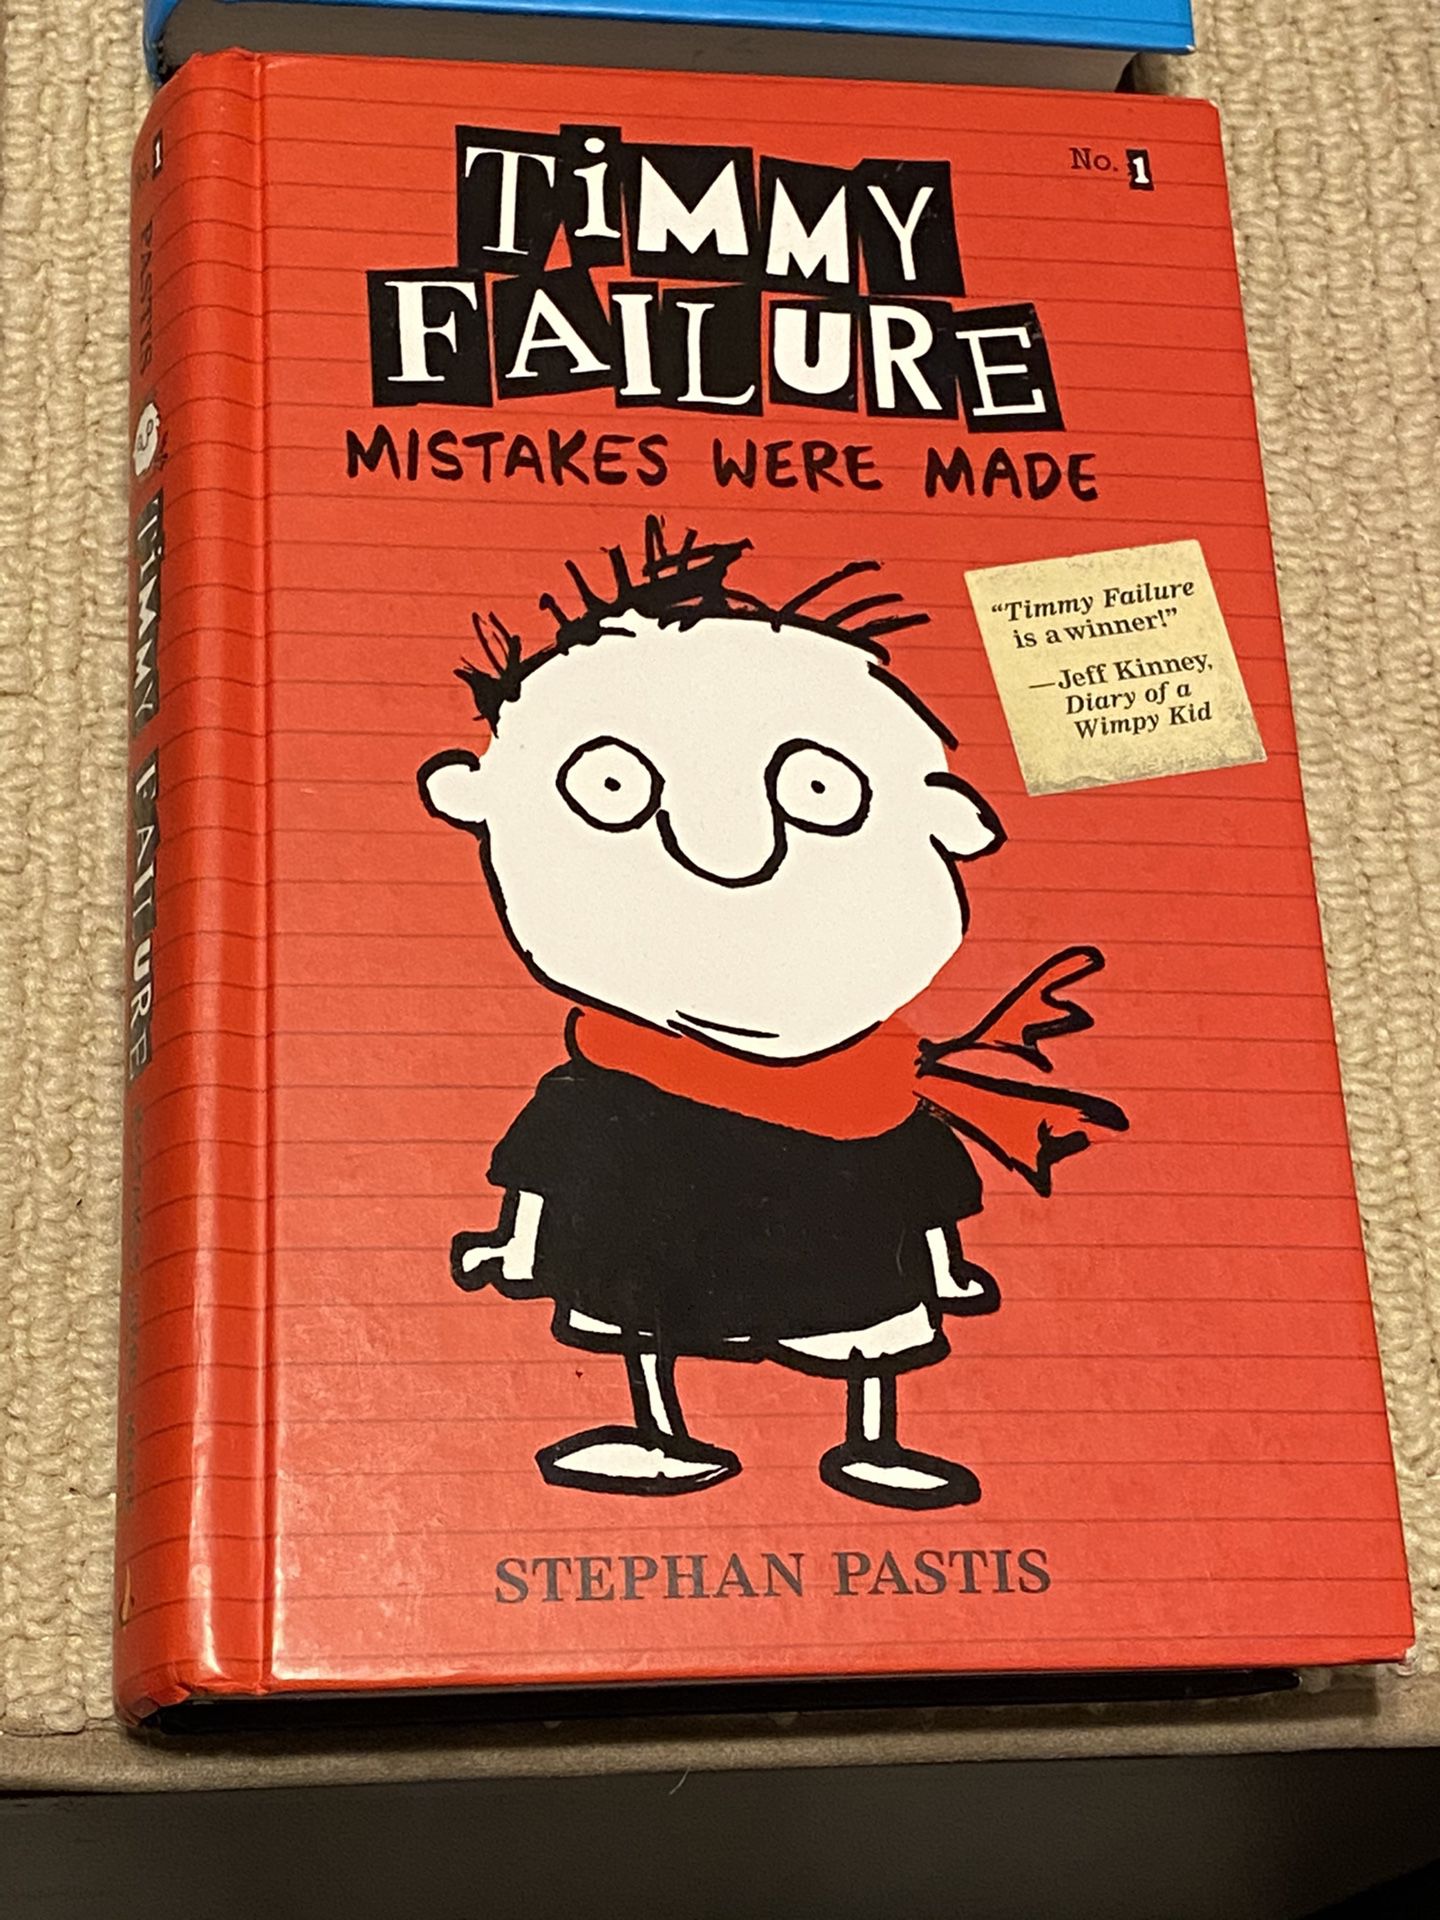 Timmy Failure Books 1&2, Hardcover. Book 2 Is Signed By The Author $15 for both!